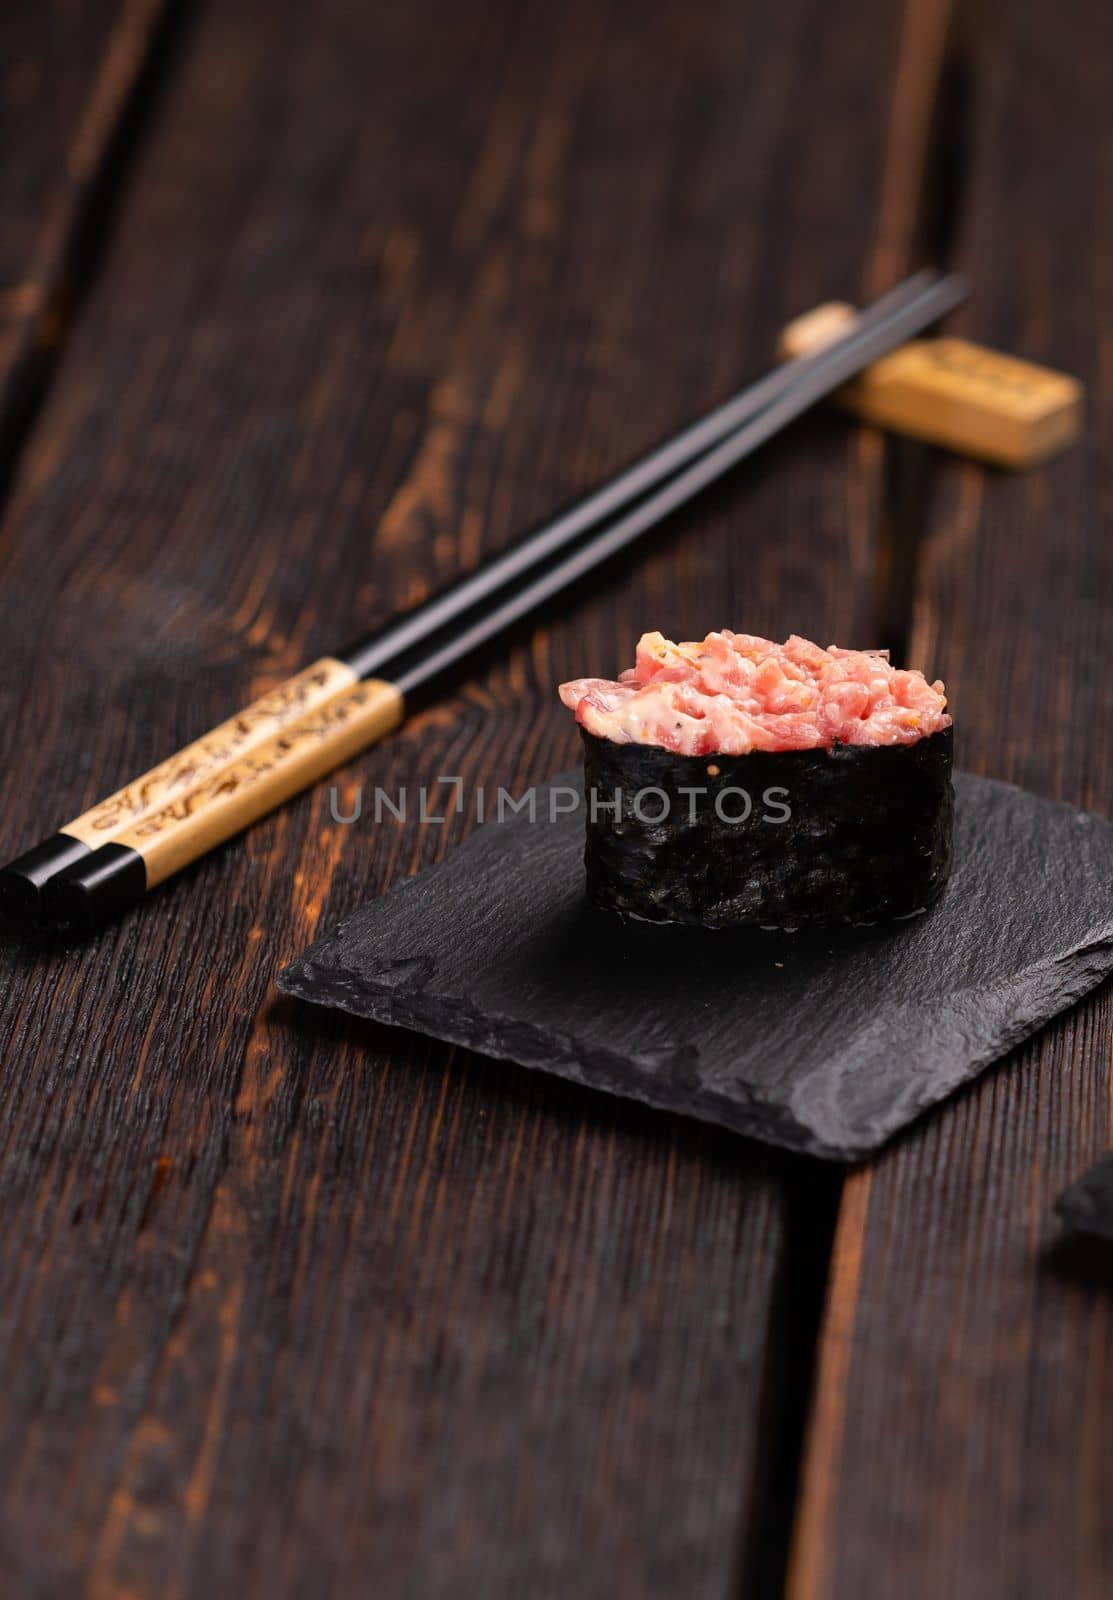 Set of Gunkan Maki Sushi with different types of fish salmon, scallop, perch, eel, shrimp and caviar on wooden table background. Sushi menu. Japanese food sushi set gunkan